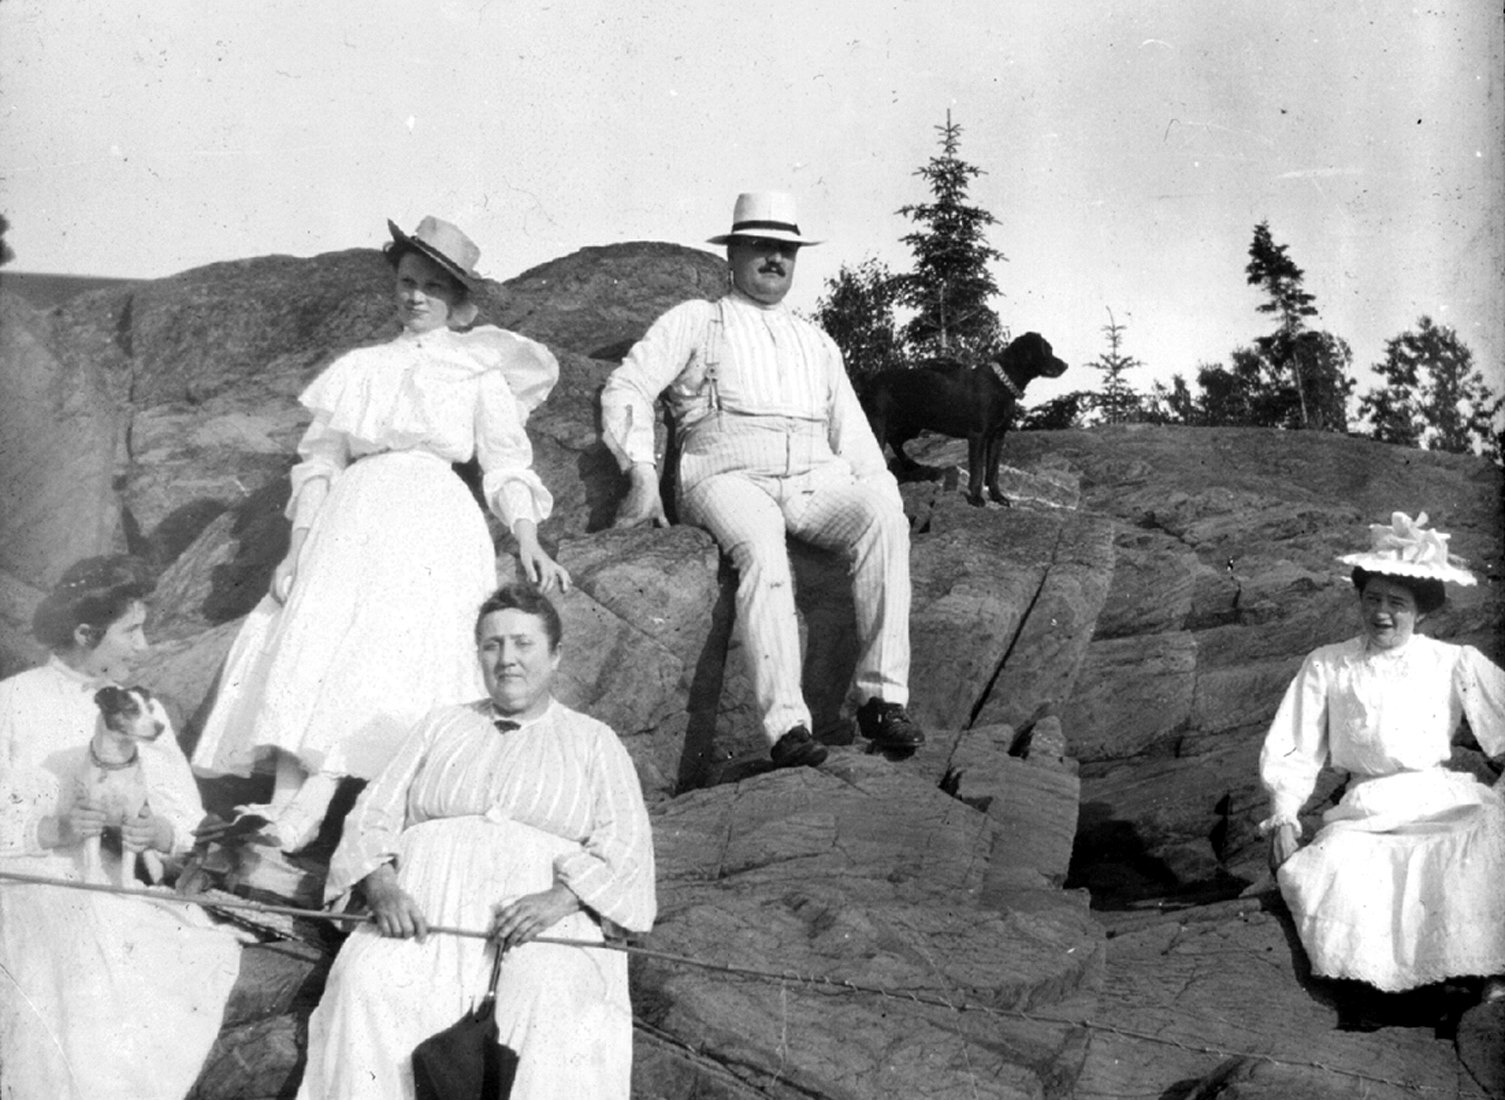 Five adults wearing white and sitting on a rock, with two dogs. One of the women is holding a fishing rod.